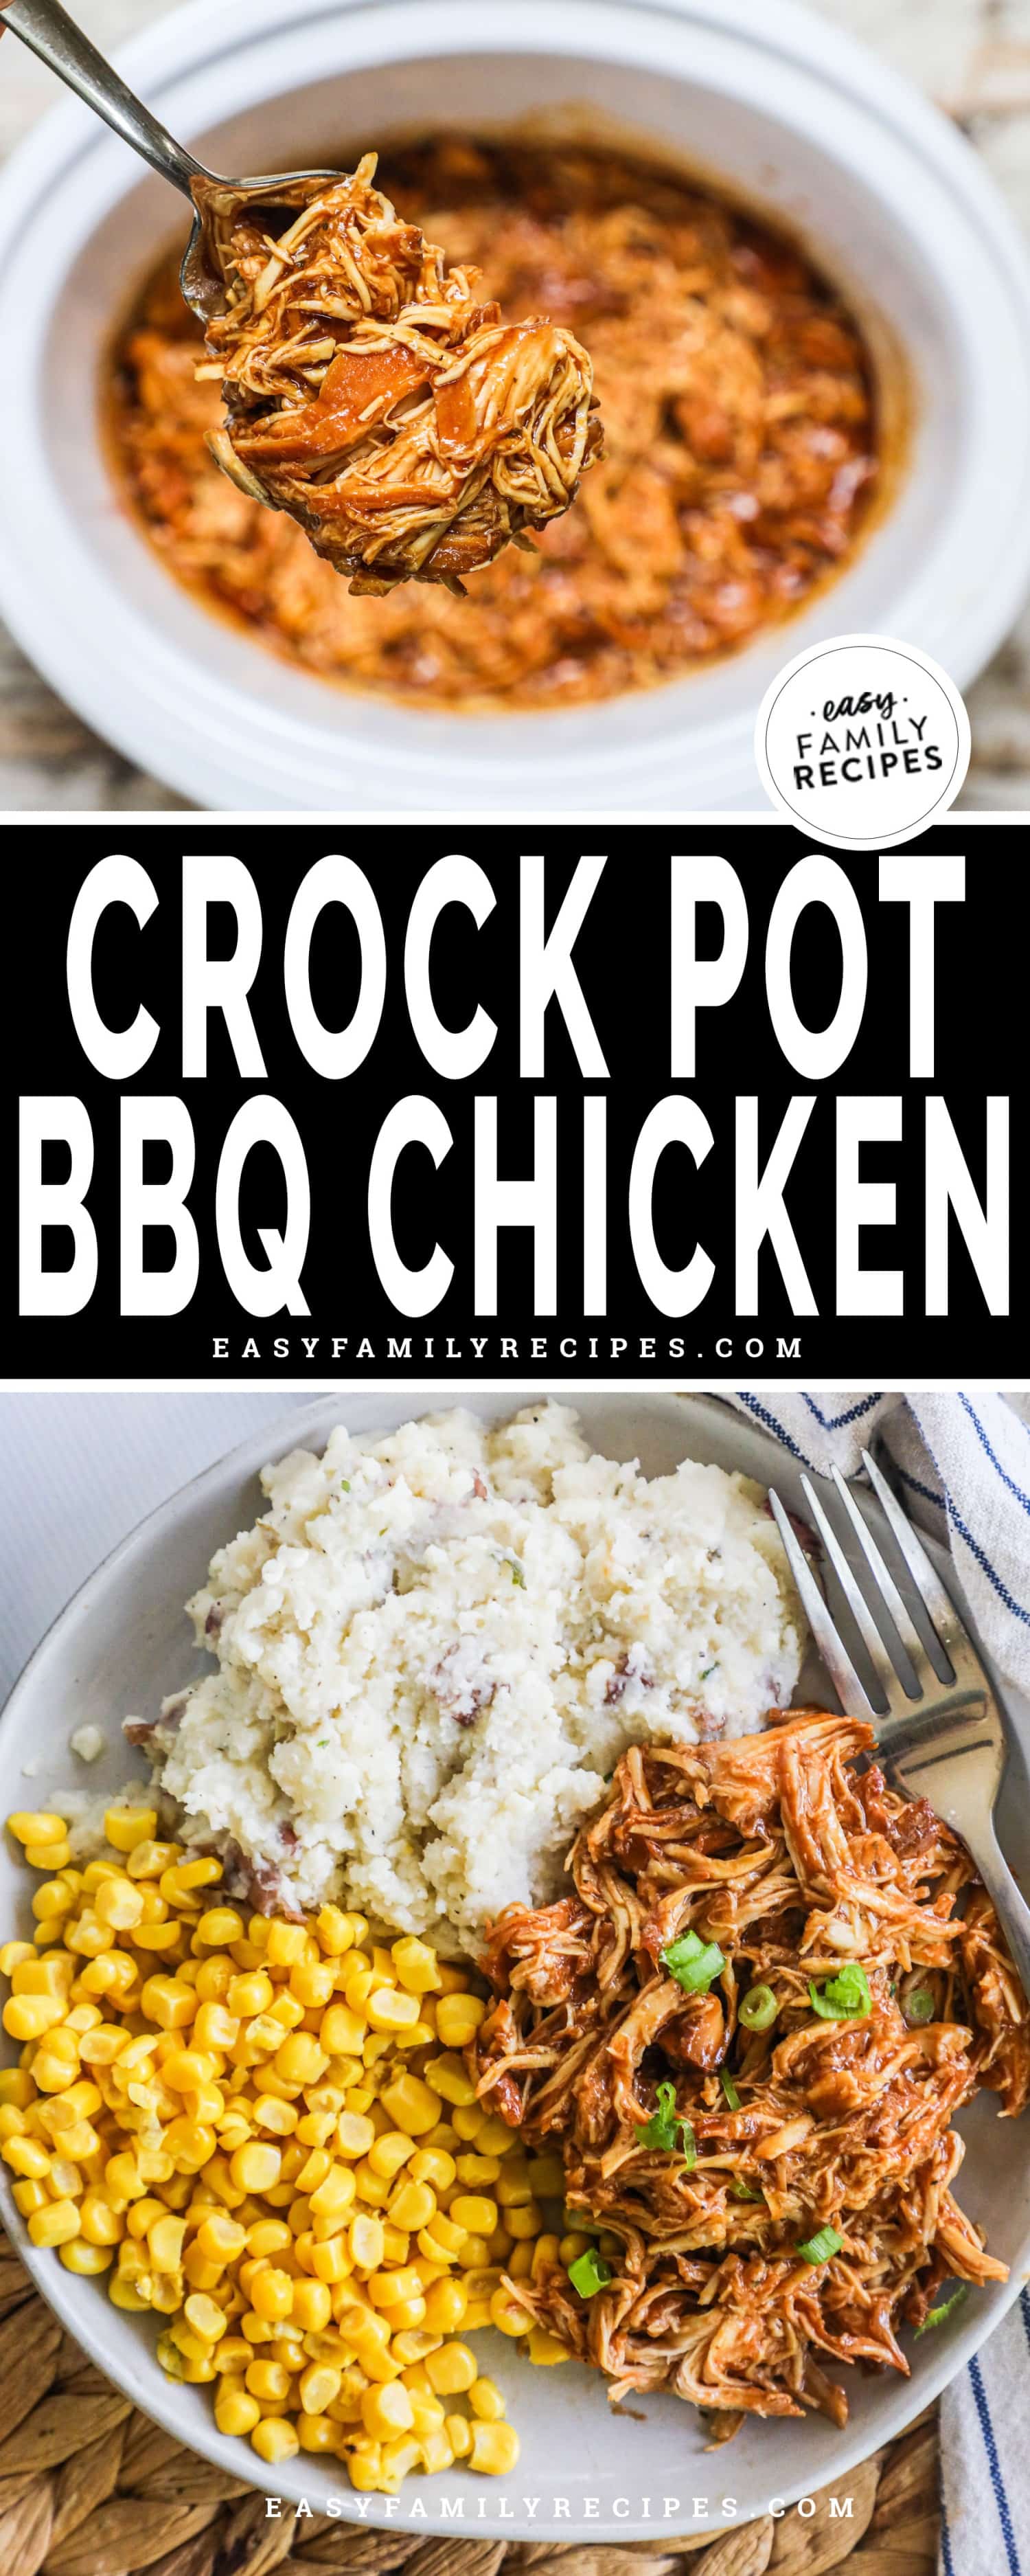 2 image collage with the top image showing a forking lifting up bbq shredded chicken over crock pot and the second image showing chicken on a plate with a side of mashed potatoes and corn.